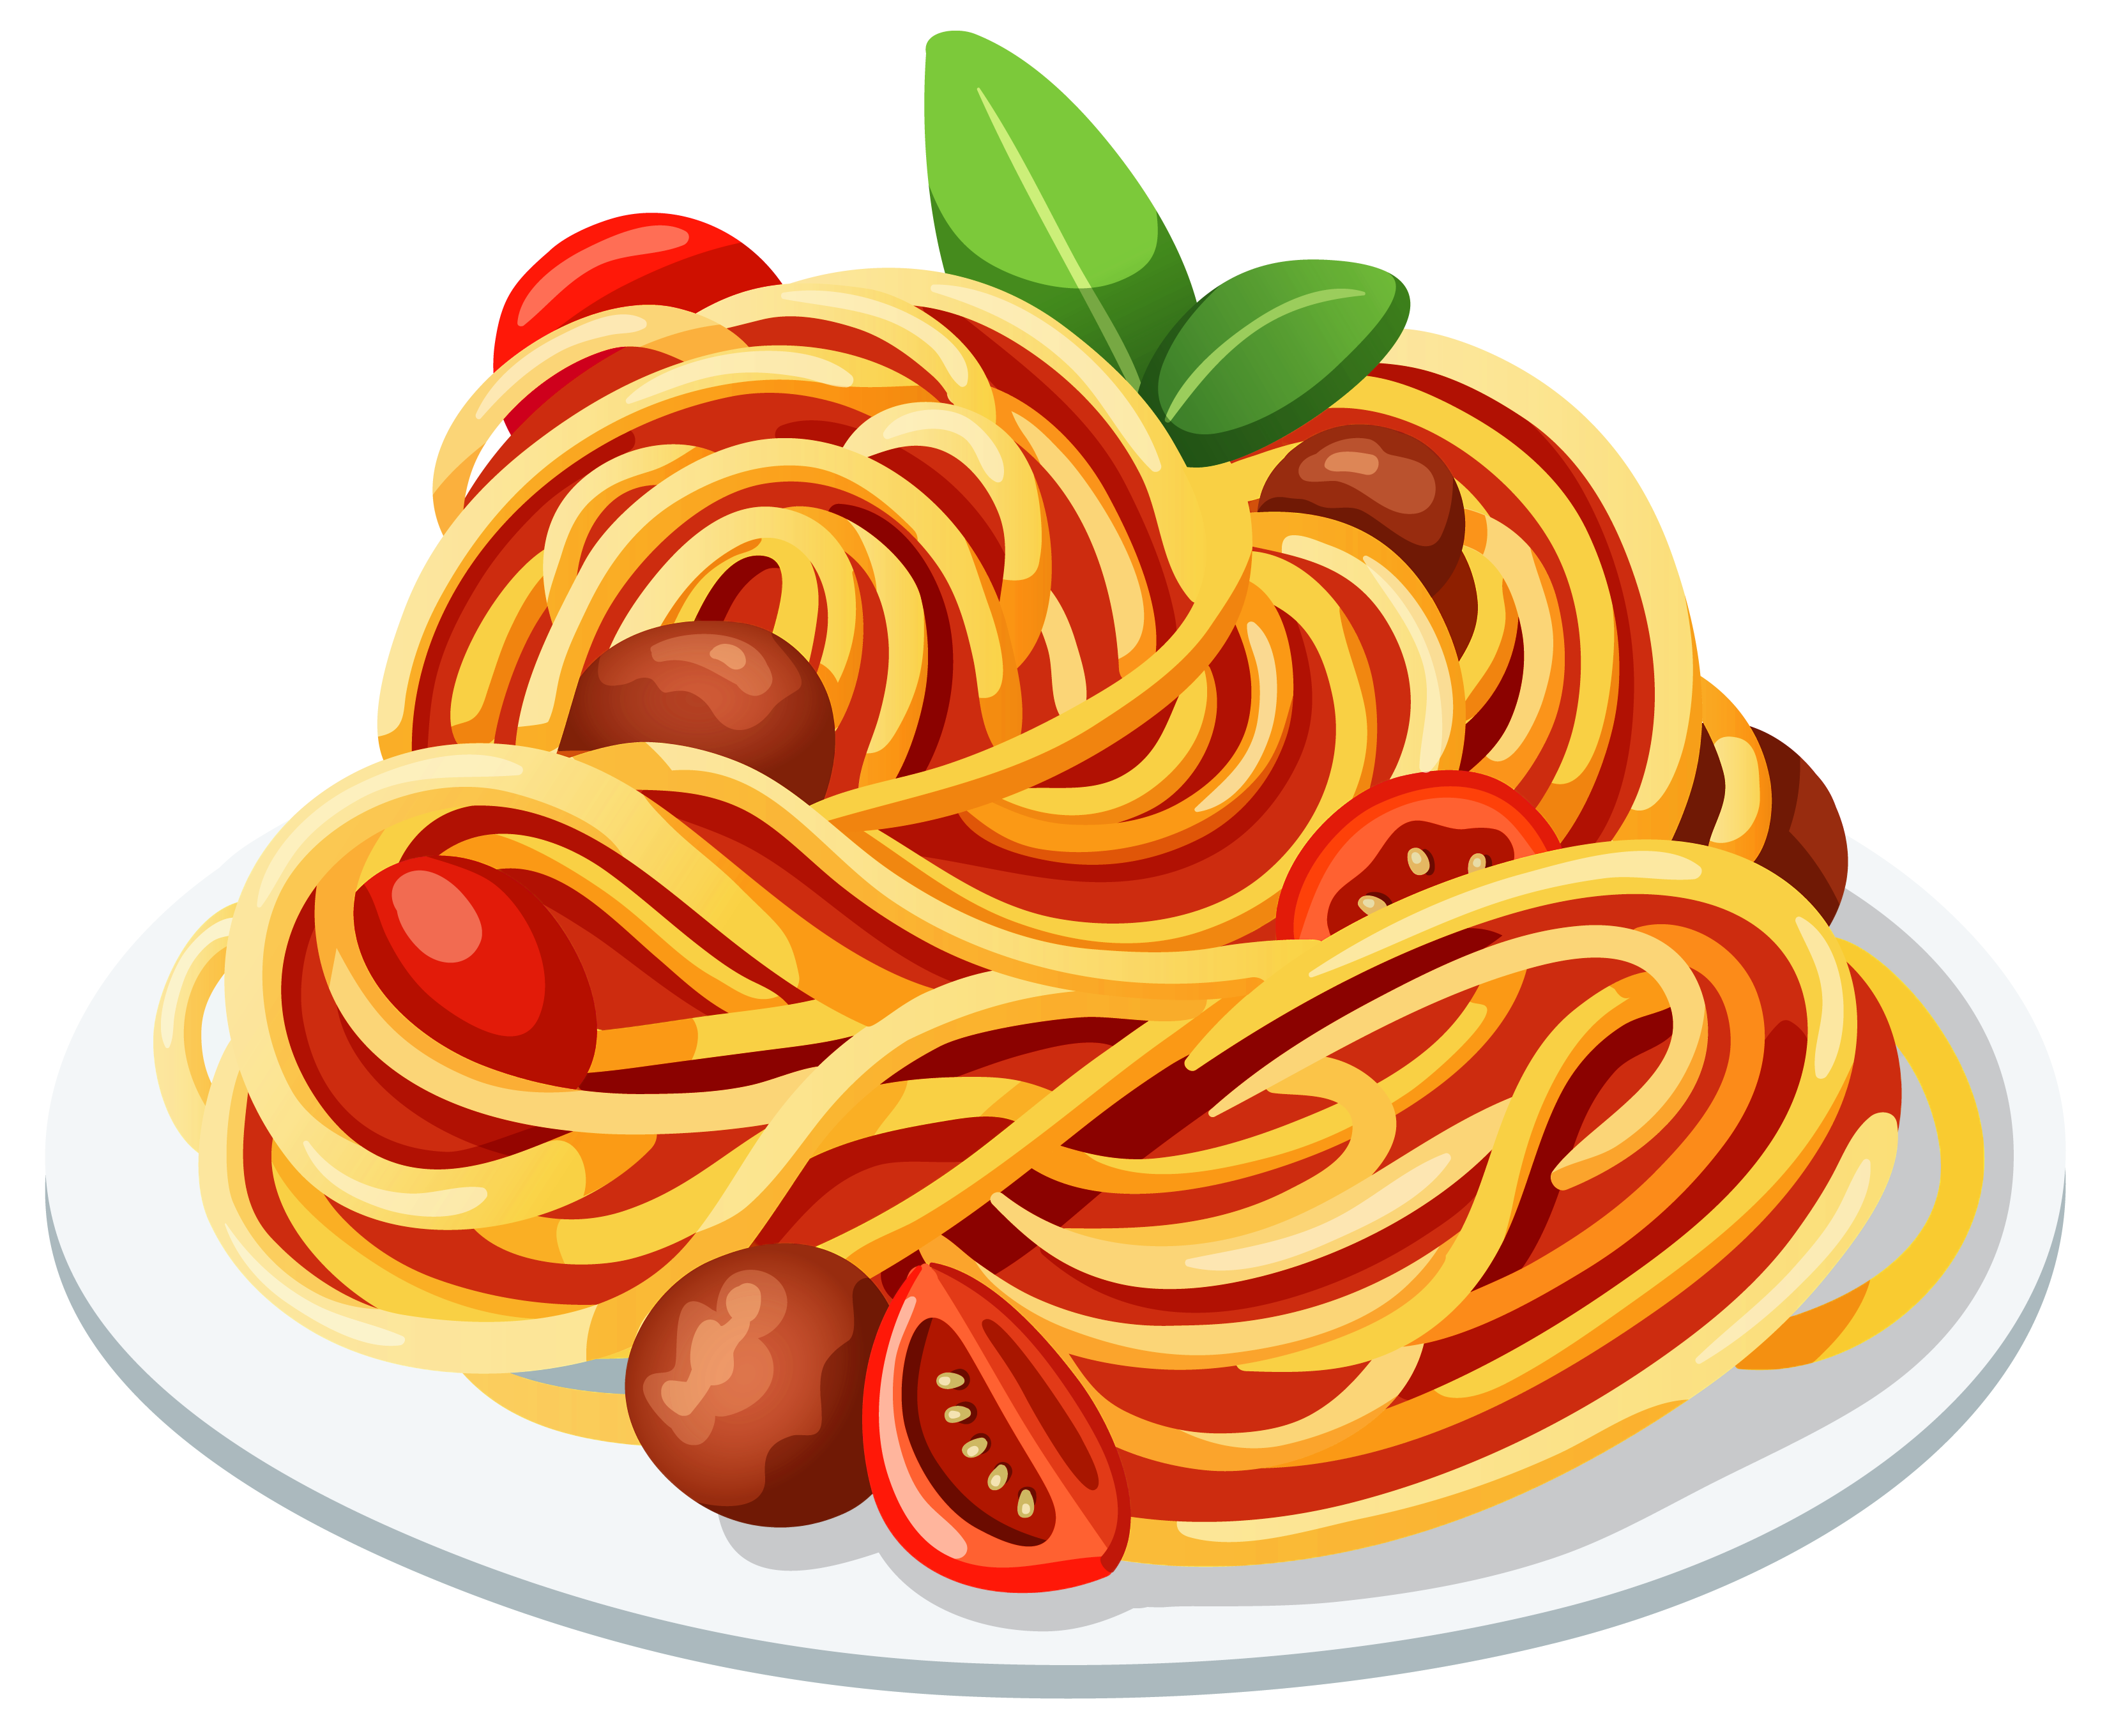 foods clipart